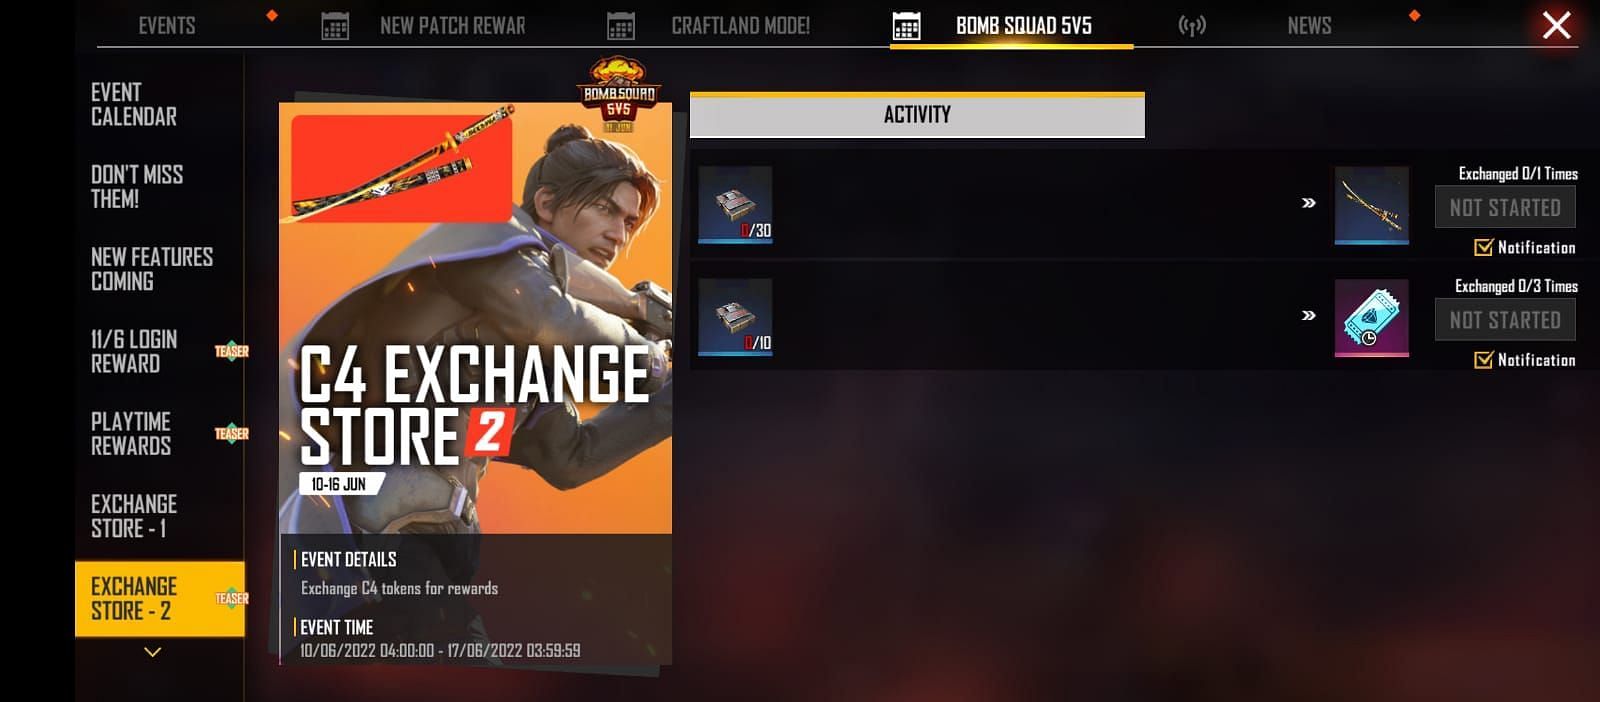 The Exchange Store - 2 event will start after seven days on Free Fire MAX (Image via Garena)